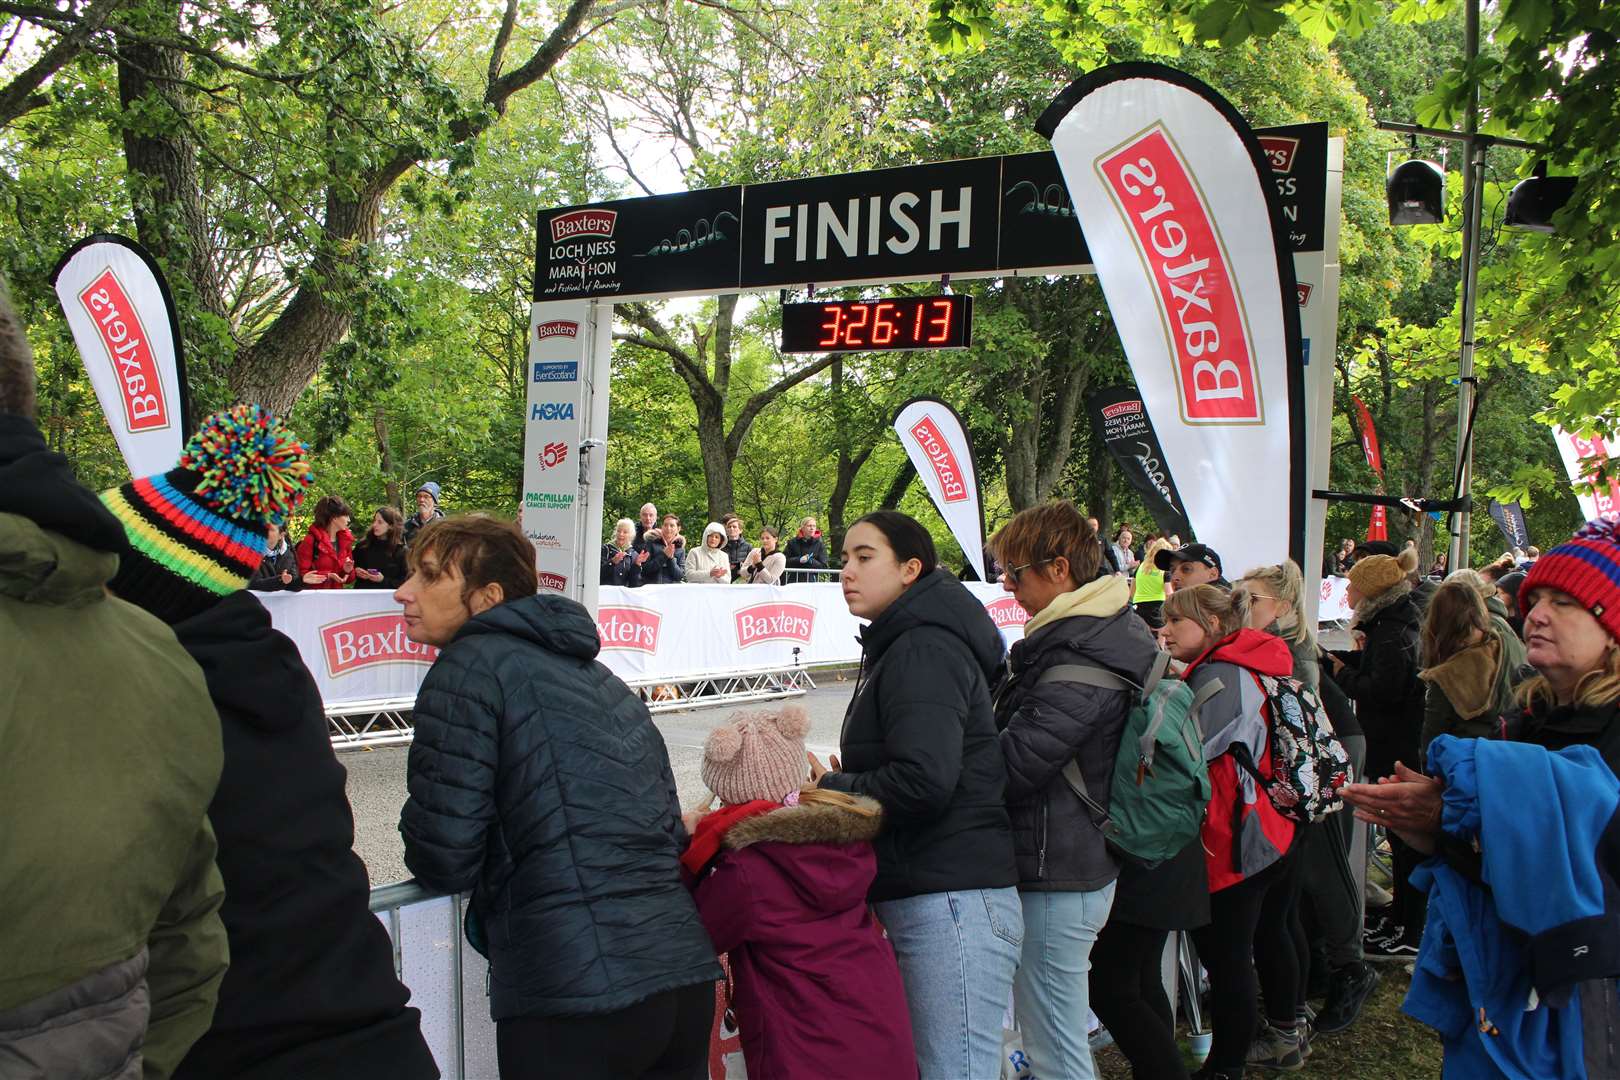 Spectators at the finish line of the 2021 Baxters Loch Ness Marathon.